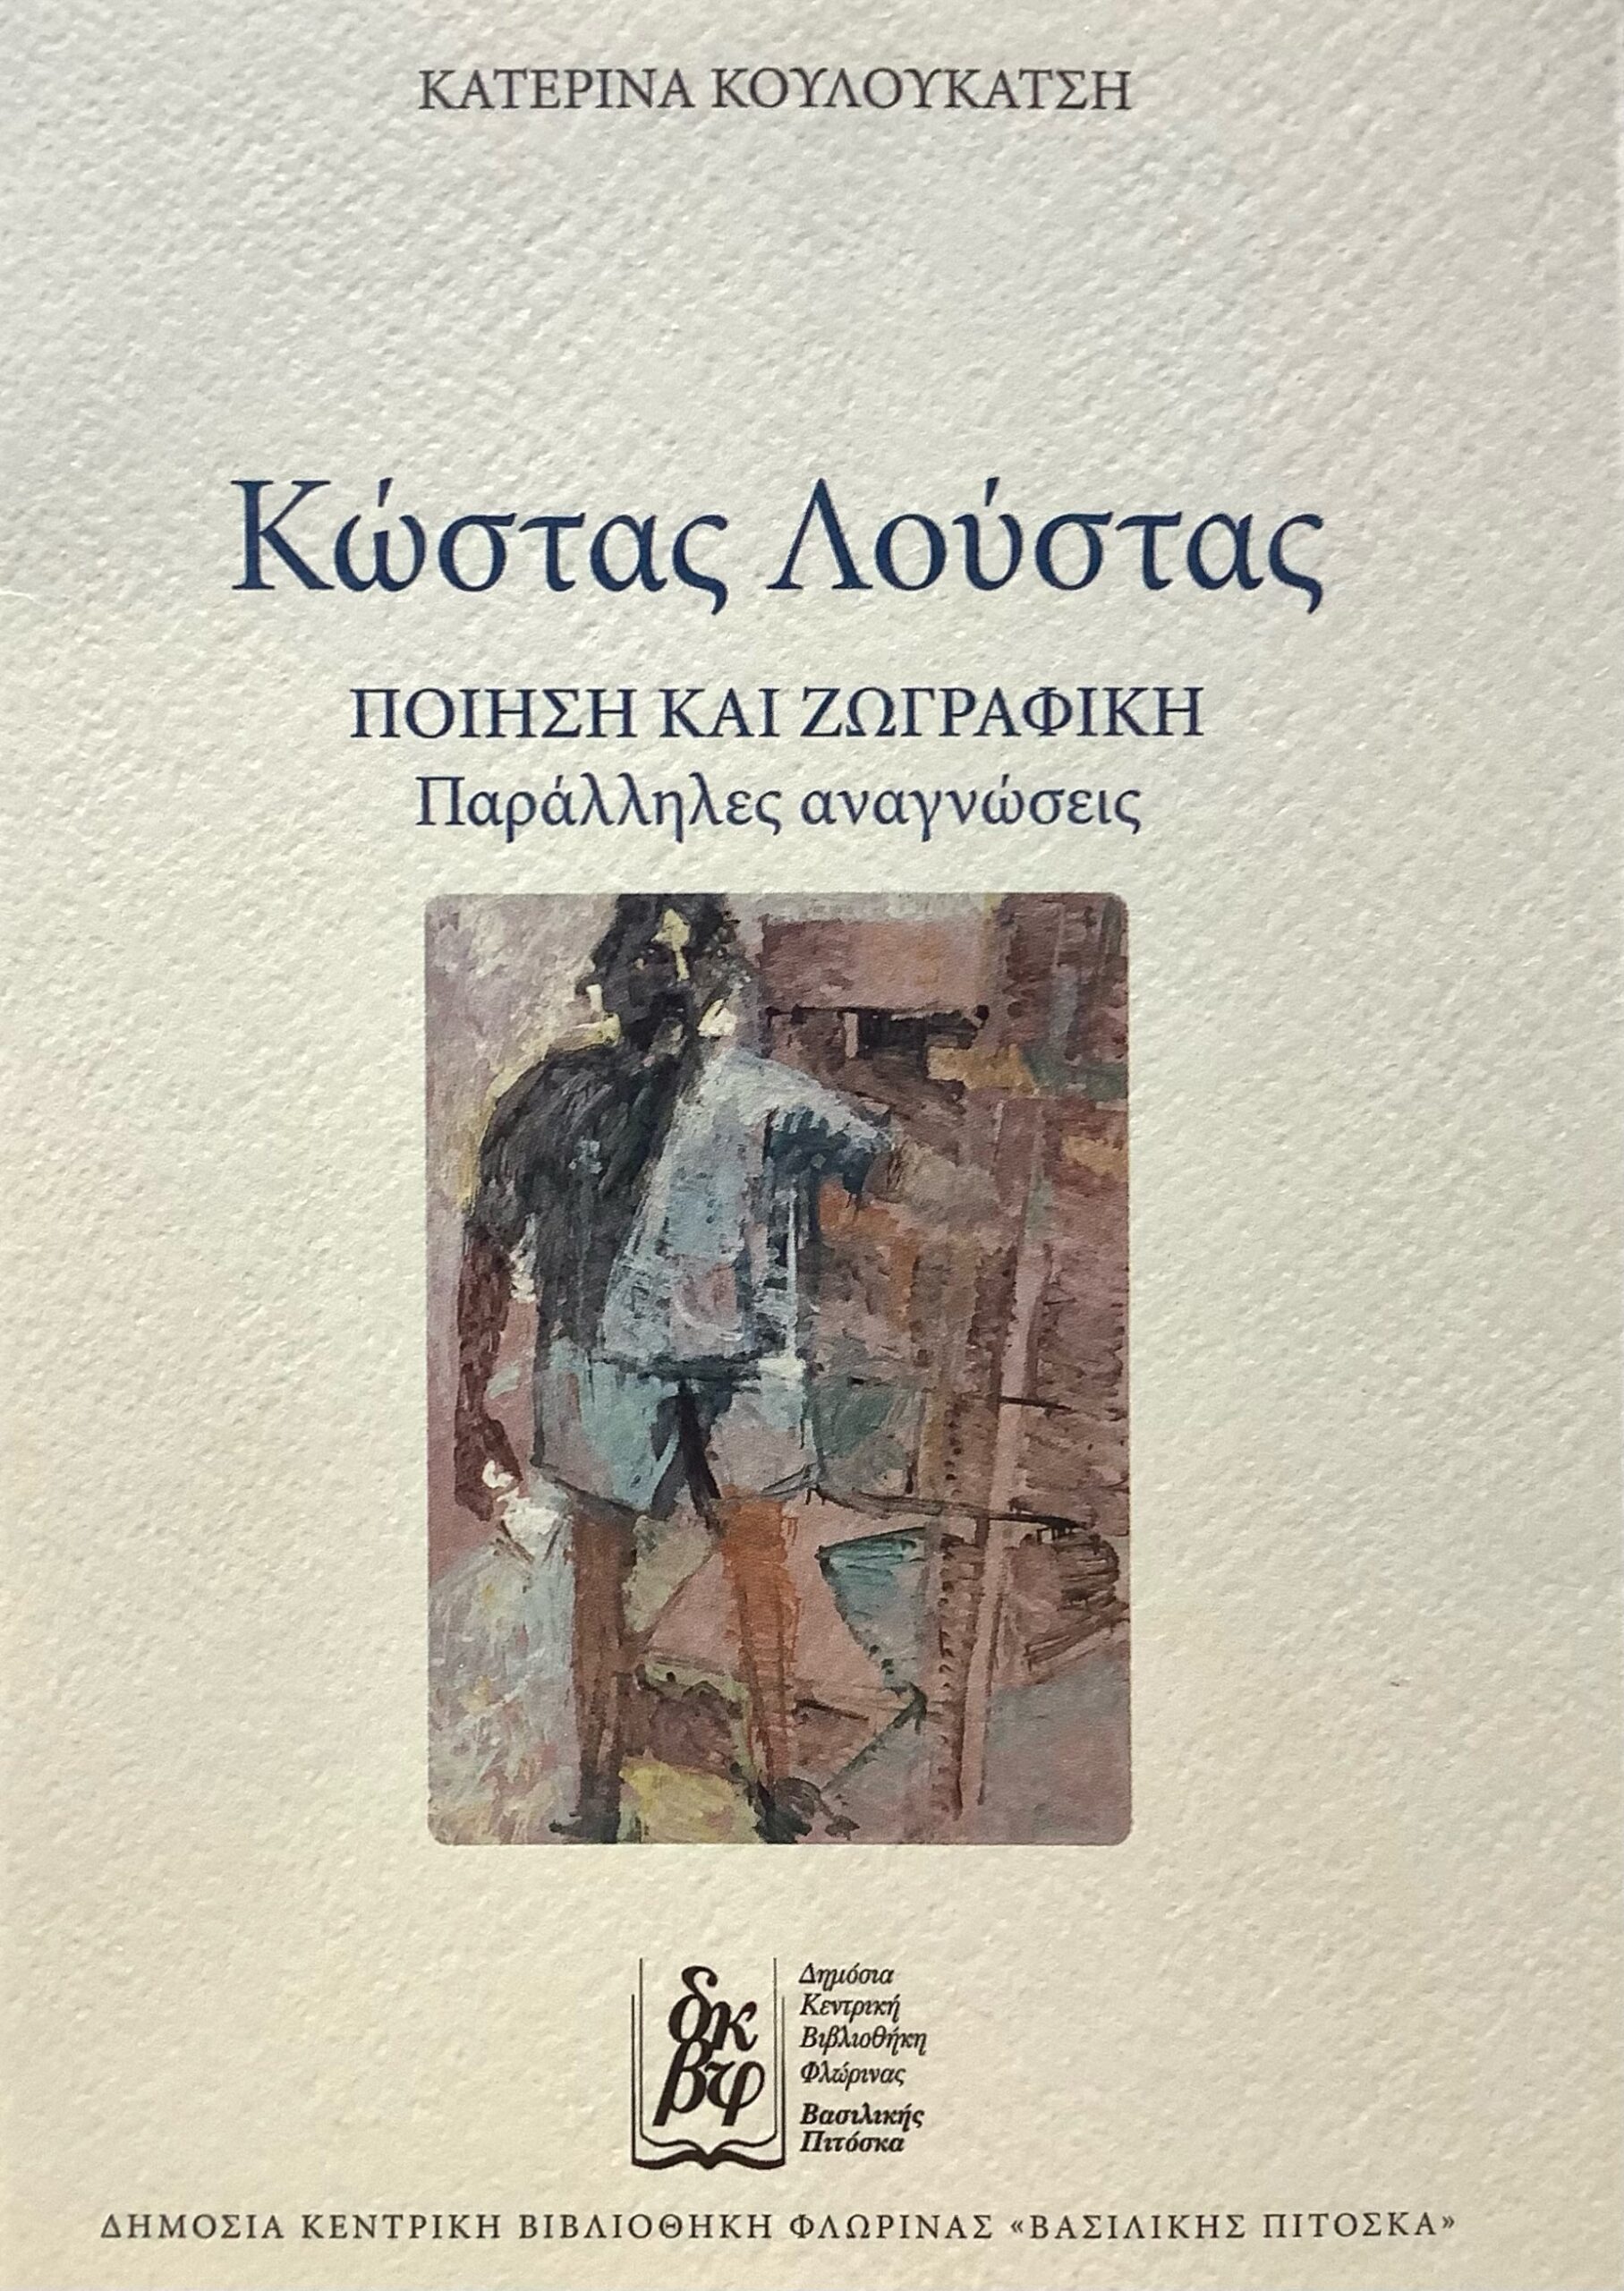 Cover of book on Kostas Loustas titled "Poetry and Art. Parallel Readings".